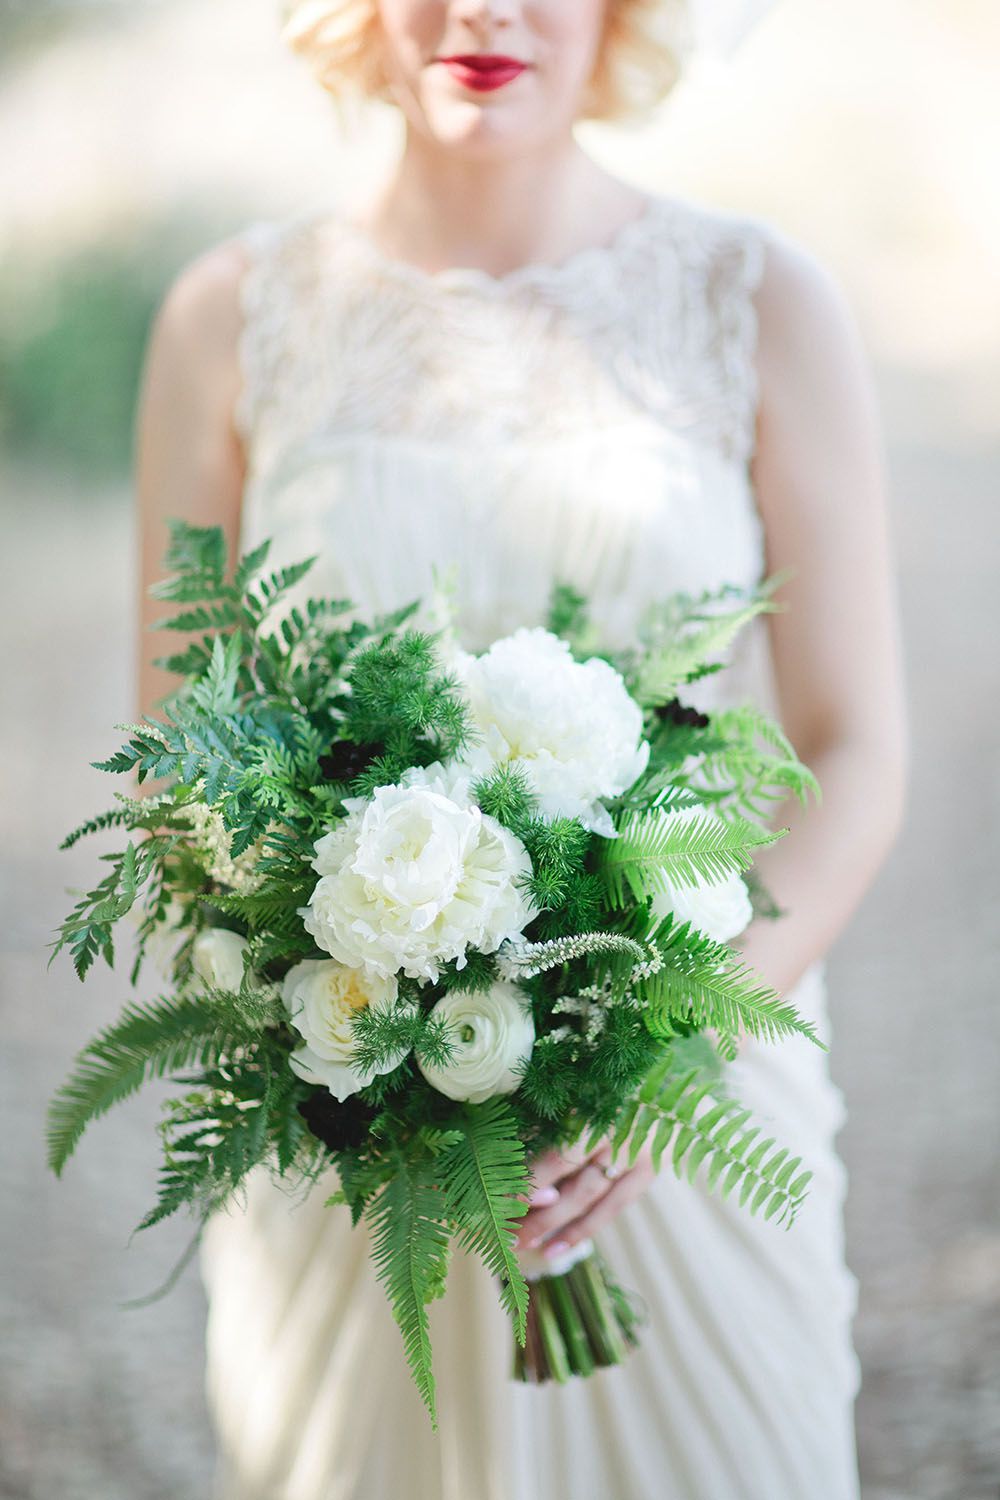 Fern Wedding Bouquet with Peonies and Ranunculus